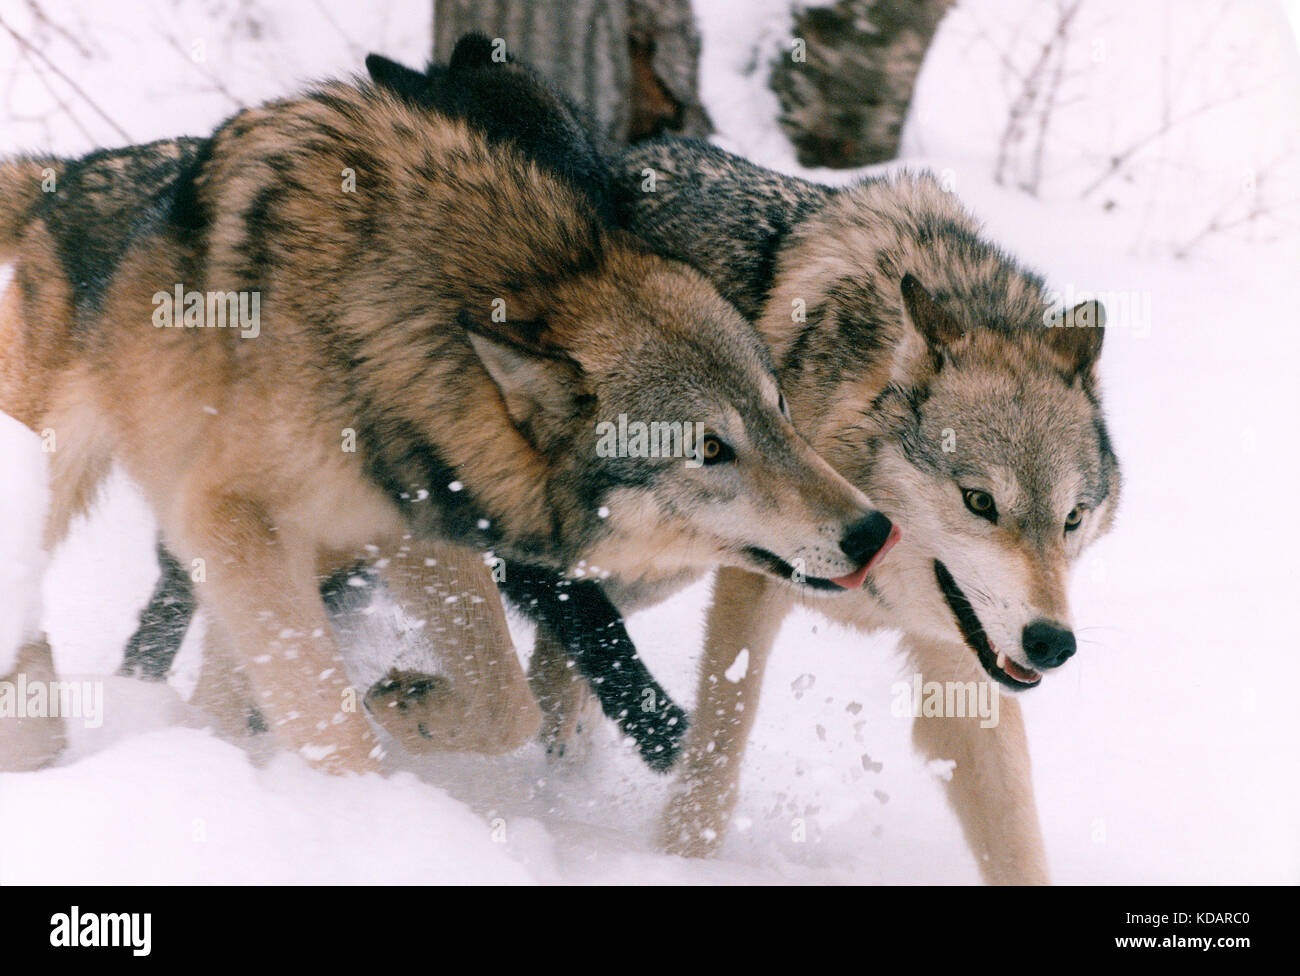 Canada. Wildlife. Gray Wolves in the snow. Stock Photo